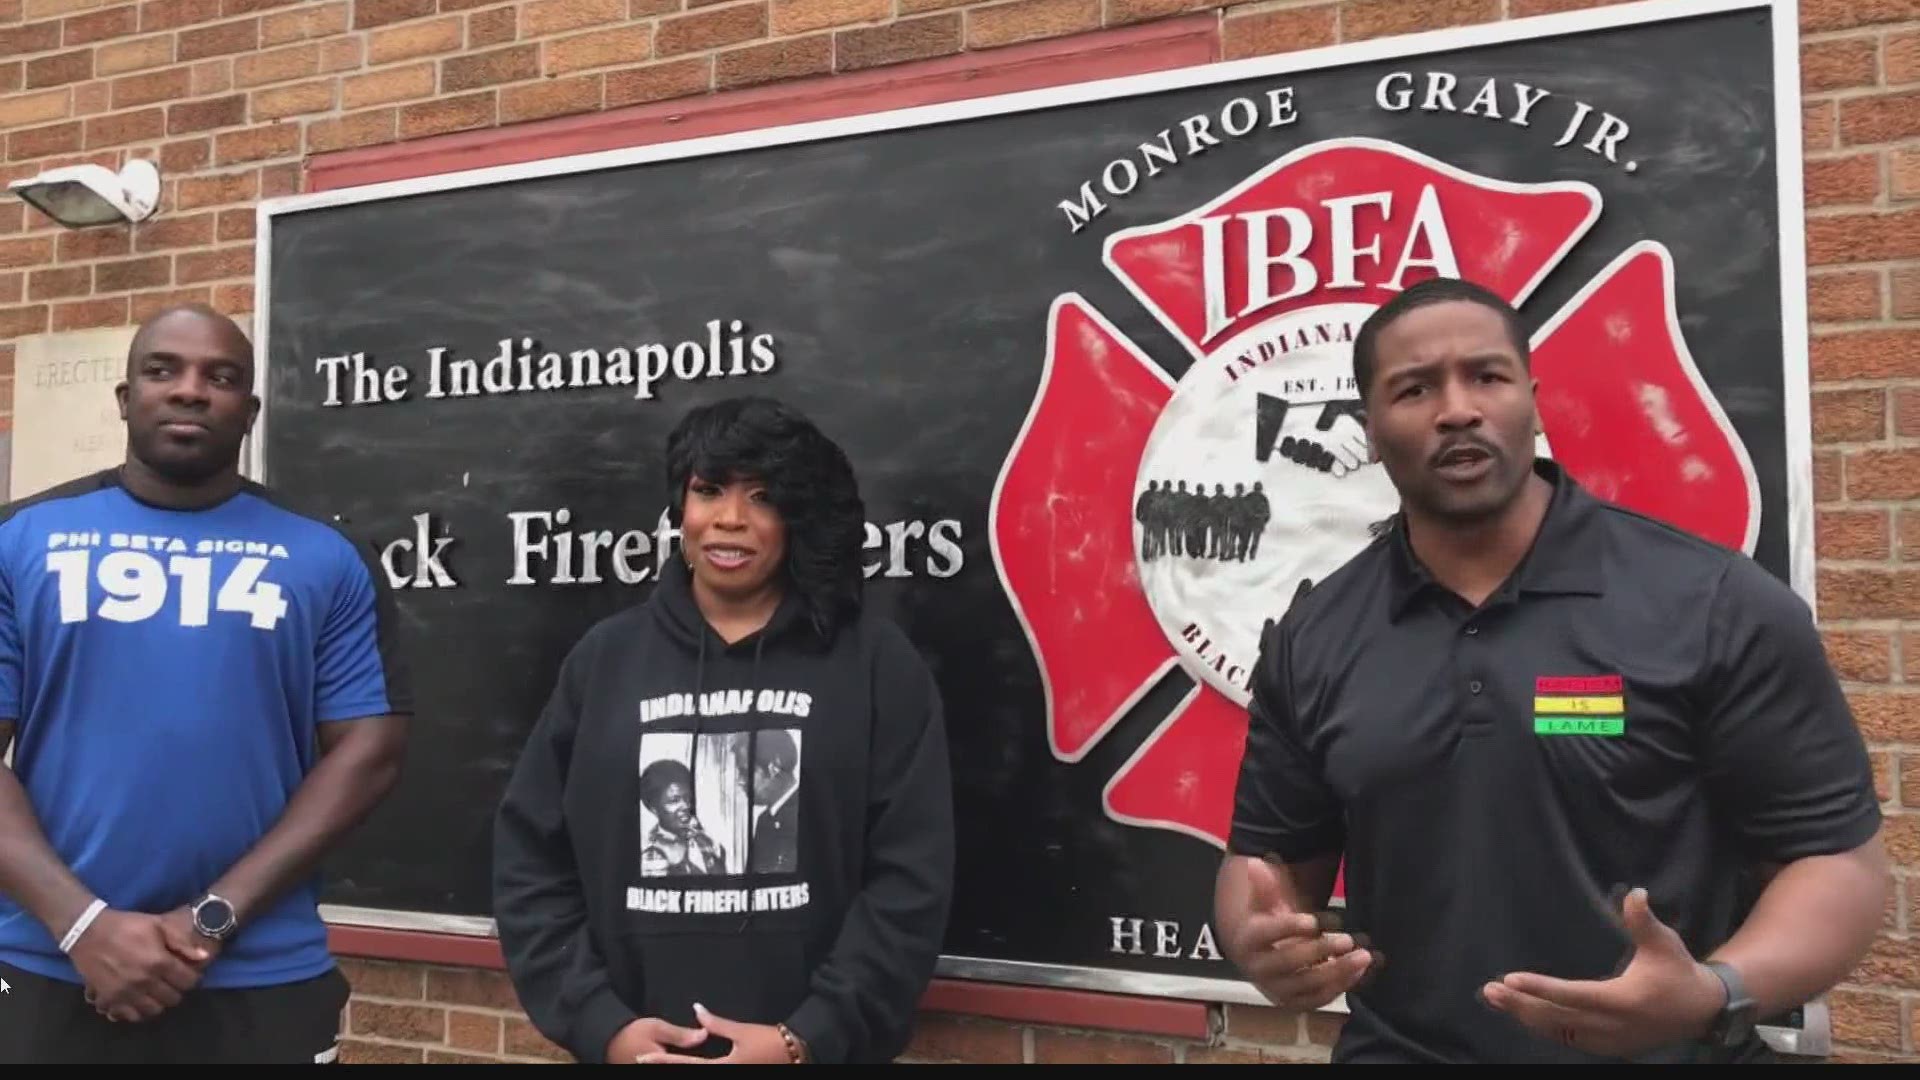 The Indianapolis Black Firefighter's Association is holding a fundraiser to highlight their rich history in Indy by building a museum.